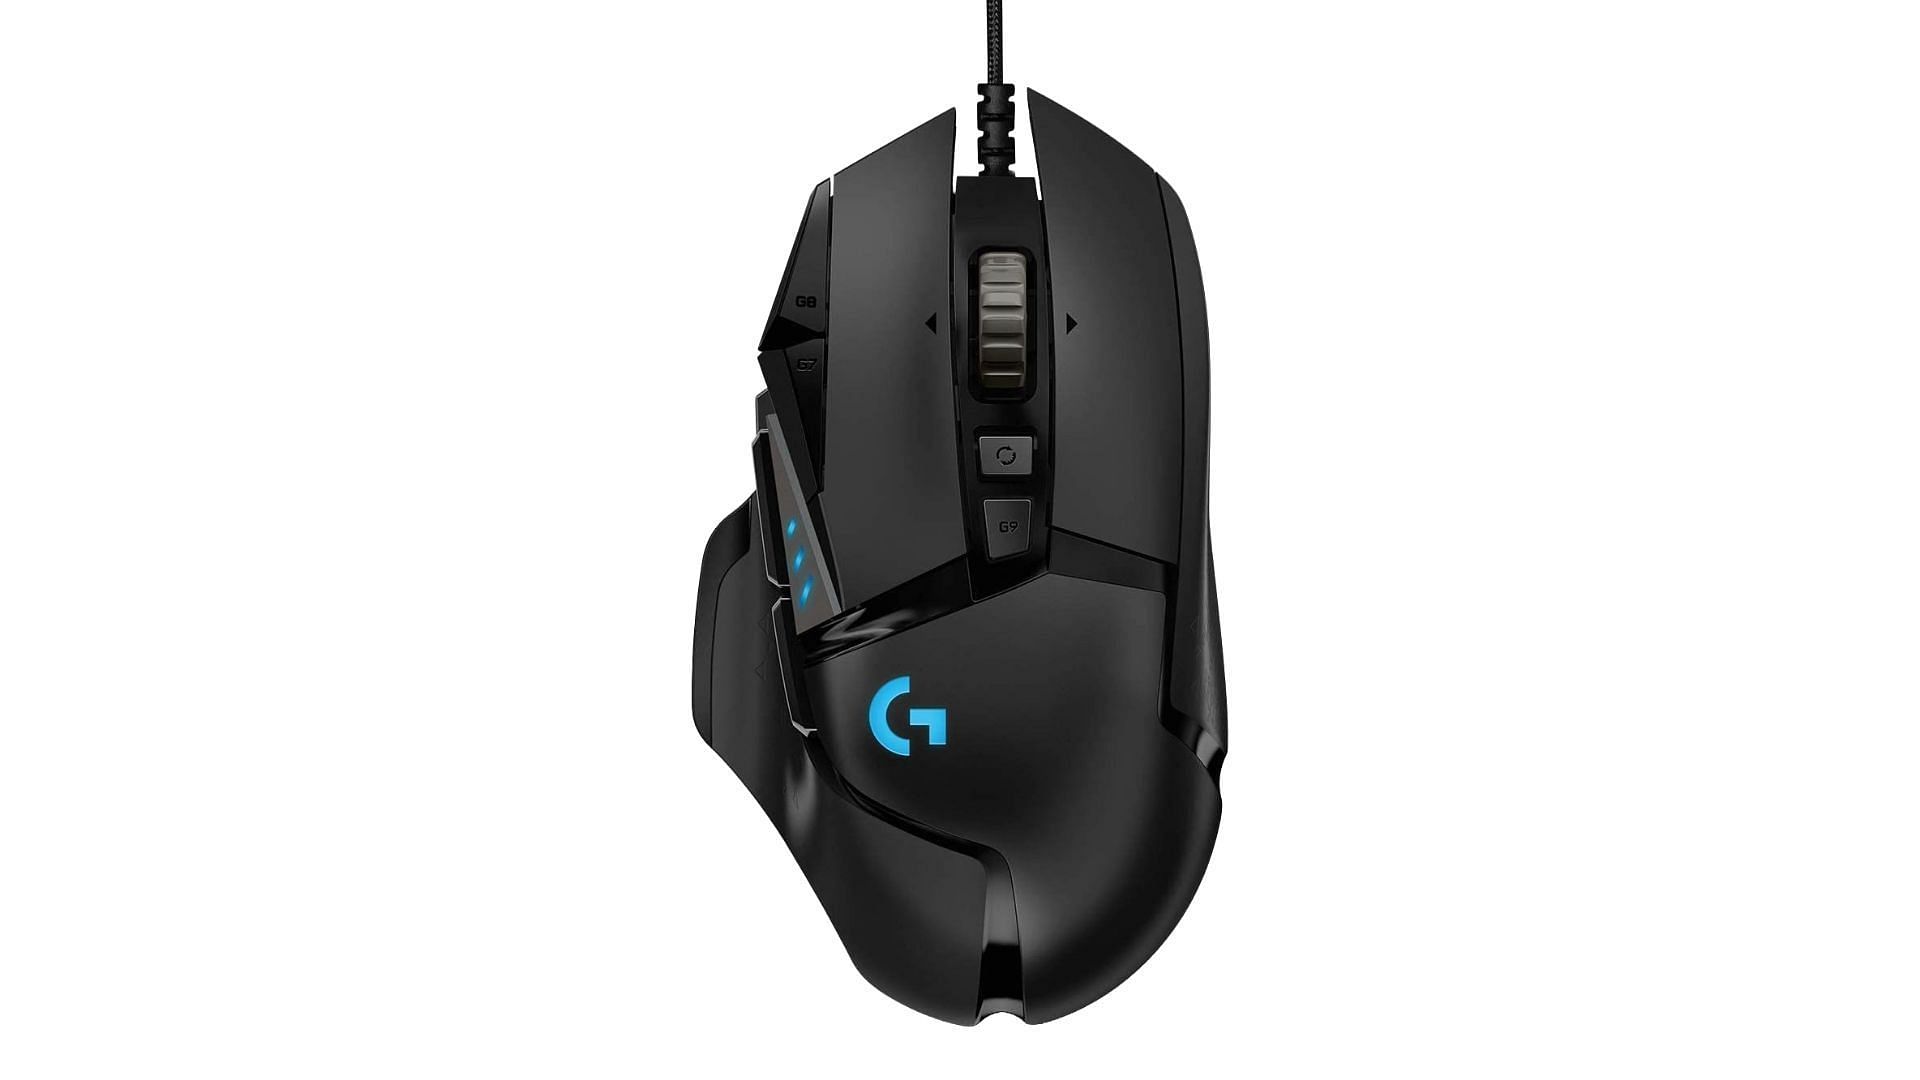 Logitech G502 HERO: the best high-performance wired gaming mouse (Image via Logitech)